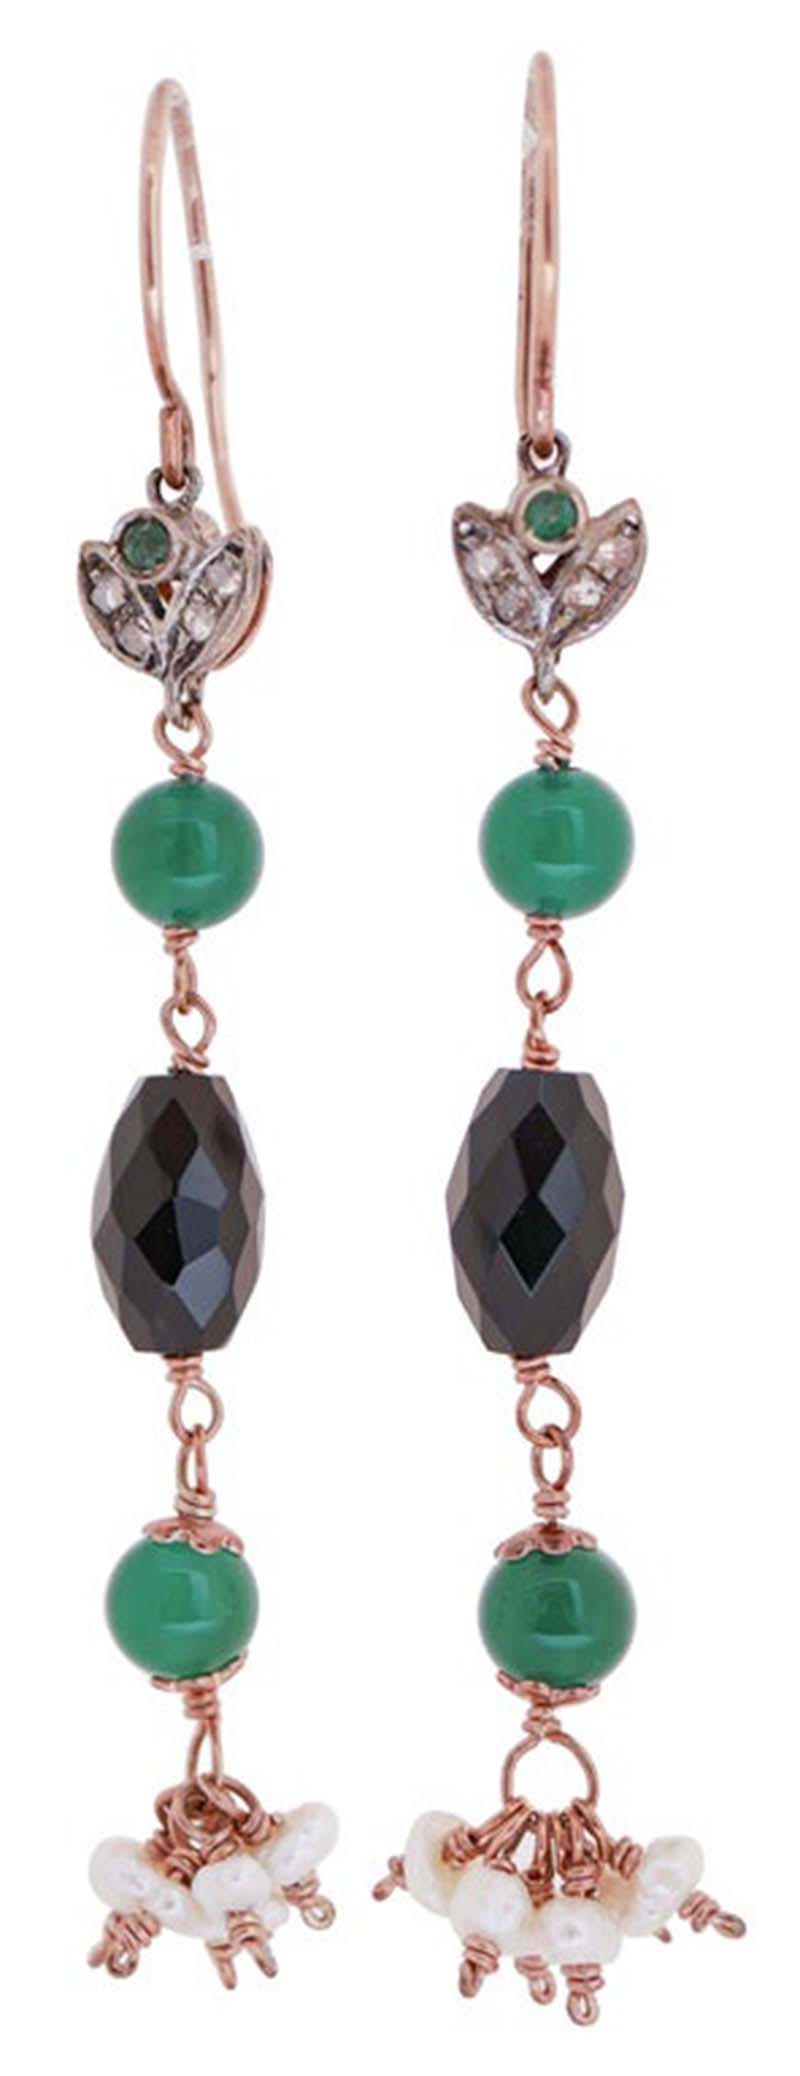 Green Agate, Onyx, Emeralds, Diamonds, Pearls, Rose Gold and Silver Earrings. For Sale